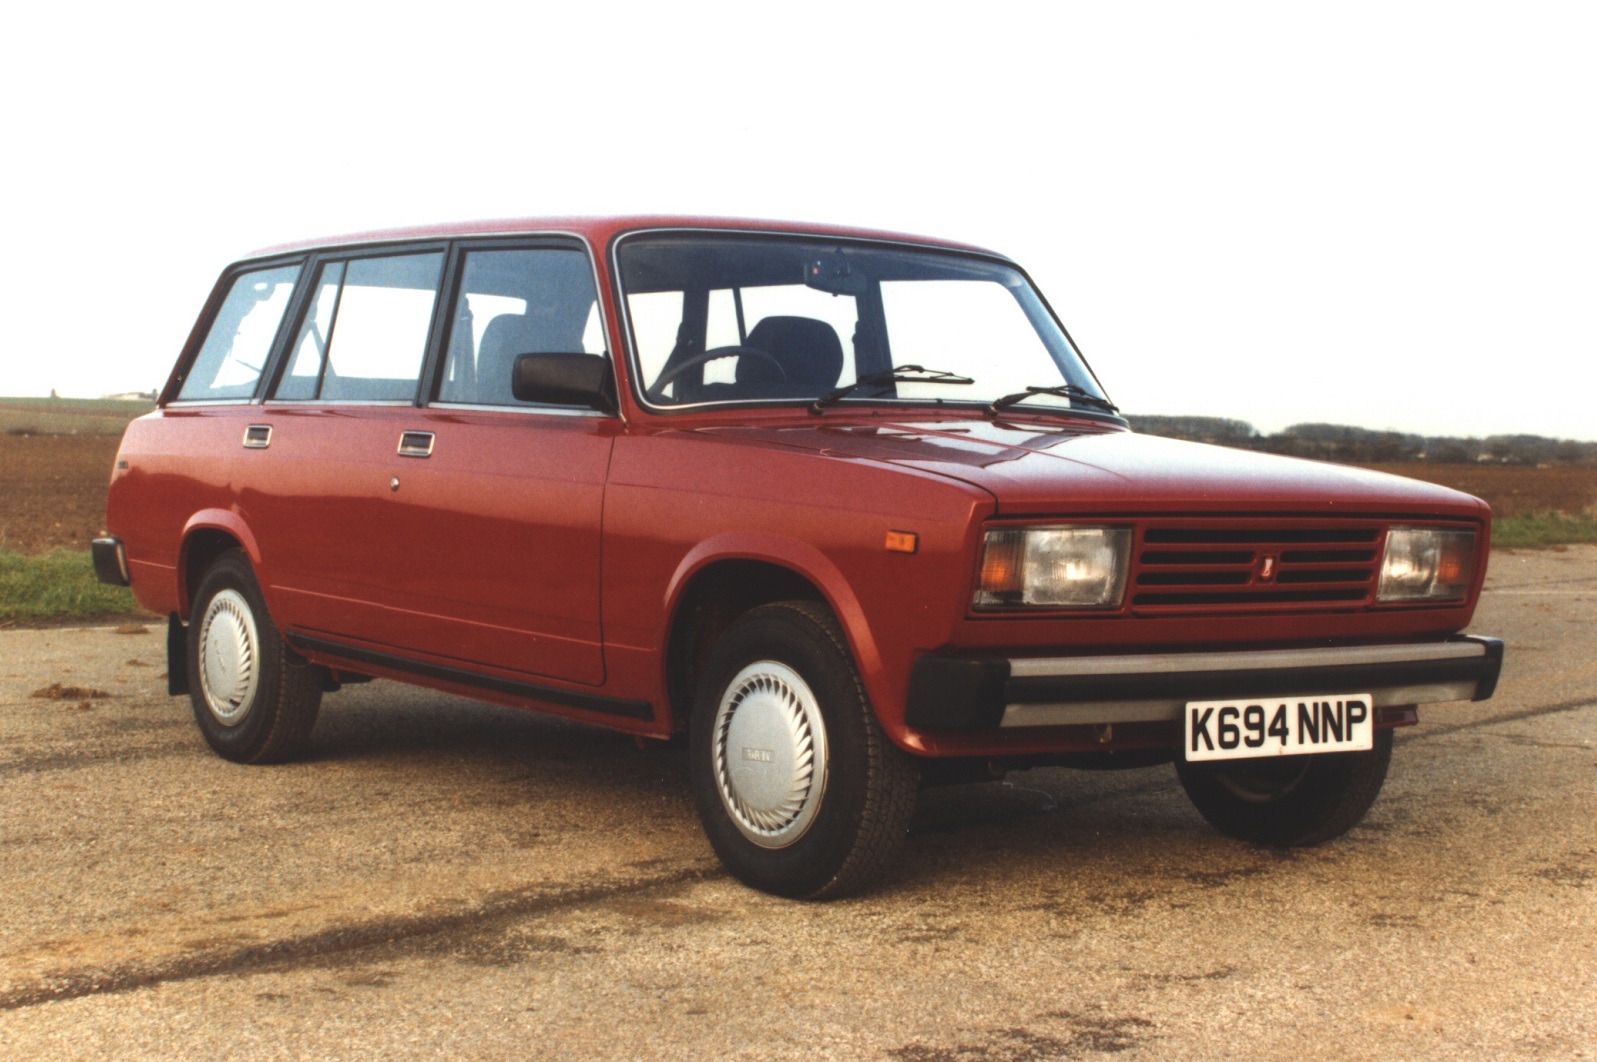 <p>The Lada Riva – also known as the VAZ 2105 and Nova – has had a lengthy life, and it started before that as the <strong>Fiat 124</strong>, first seen in 1966. Cold War needs on the eastern side of the Iron Curtain demanded a cheap, rugged machine that could deal with poor roads and fuel, and the Riva managed.</p><p>Don’t expect much in the way of comfort or driving dynamics if you take the plunge into ownership as 18 million drivers <strong>can be wrong</strong>.</p>